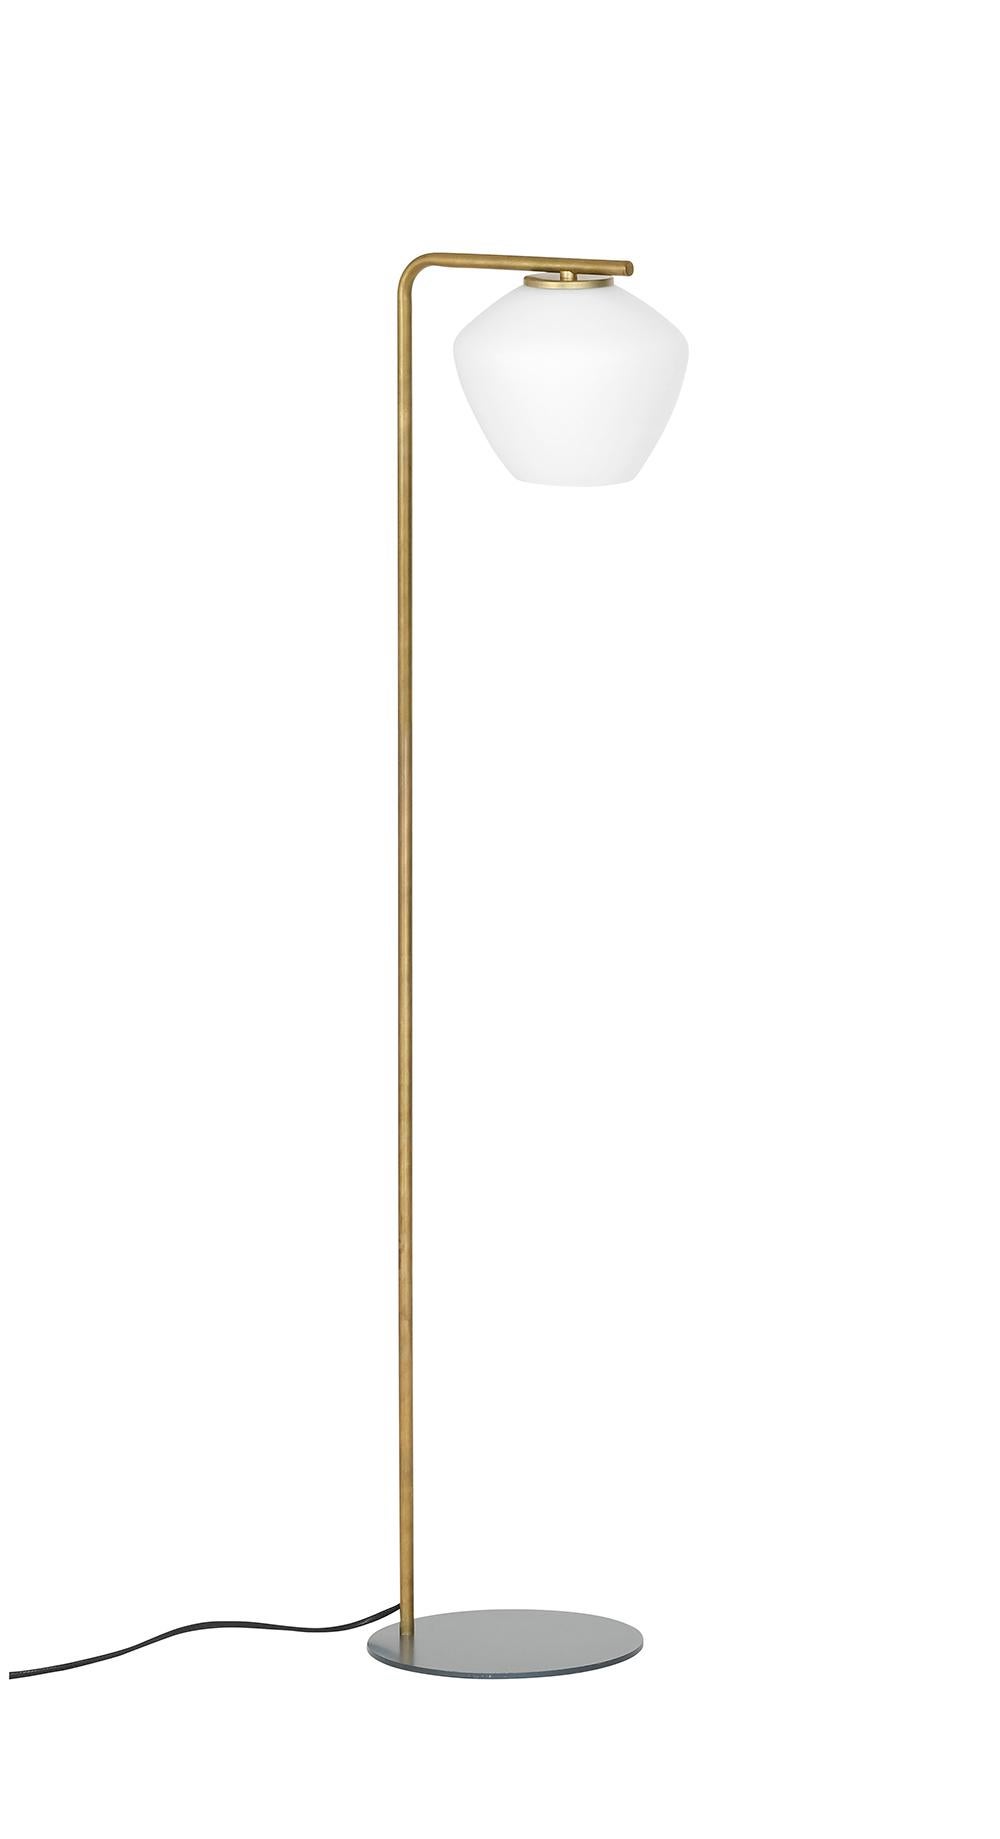 Floor lamp model DK designed by Henrik Tengler and manufactured by Konsthantverk.

The production of lamps, wall lights and floor lamps are manufactured using craftsman’s techniques with the same materials and techniques as the first